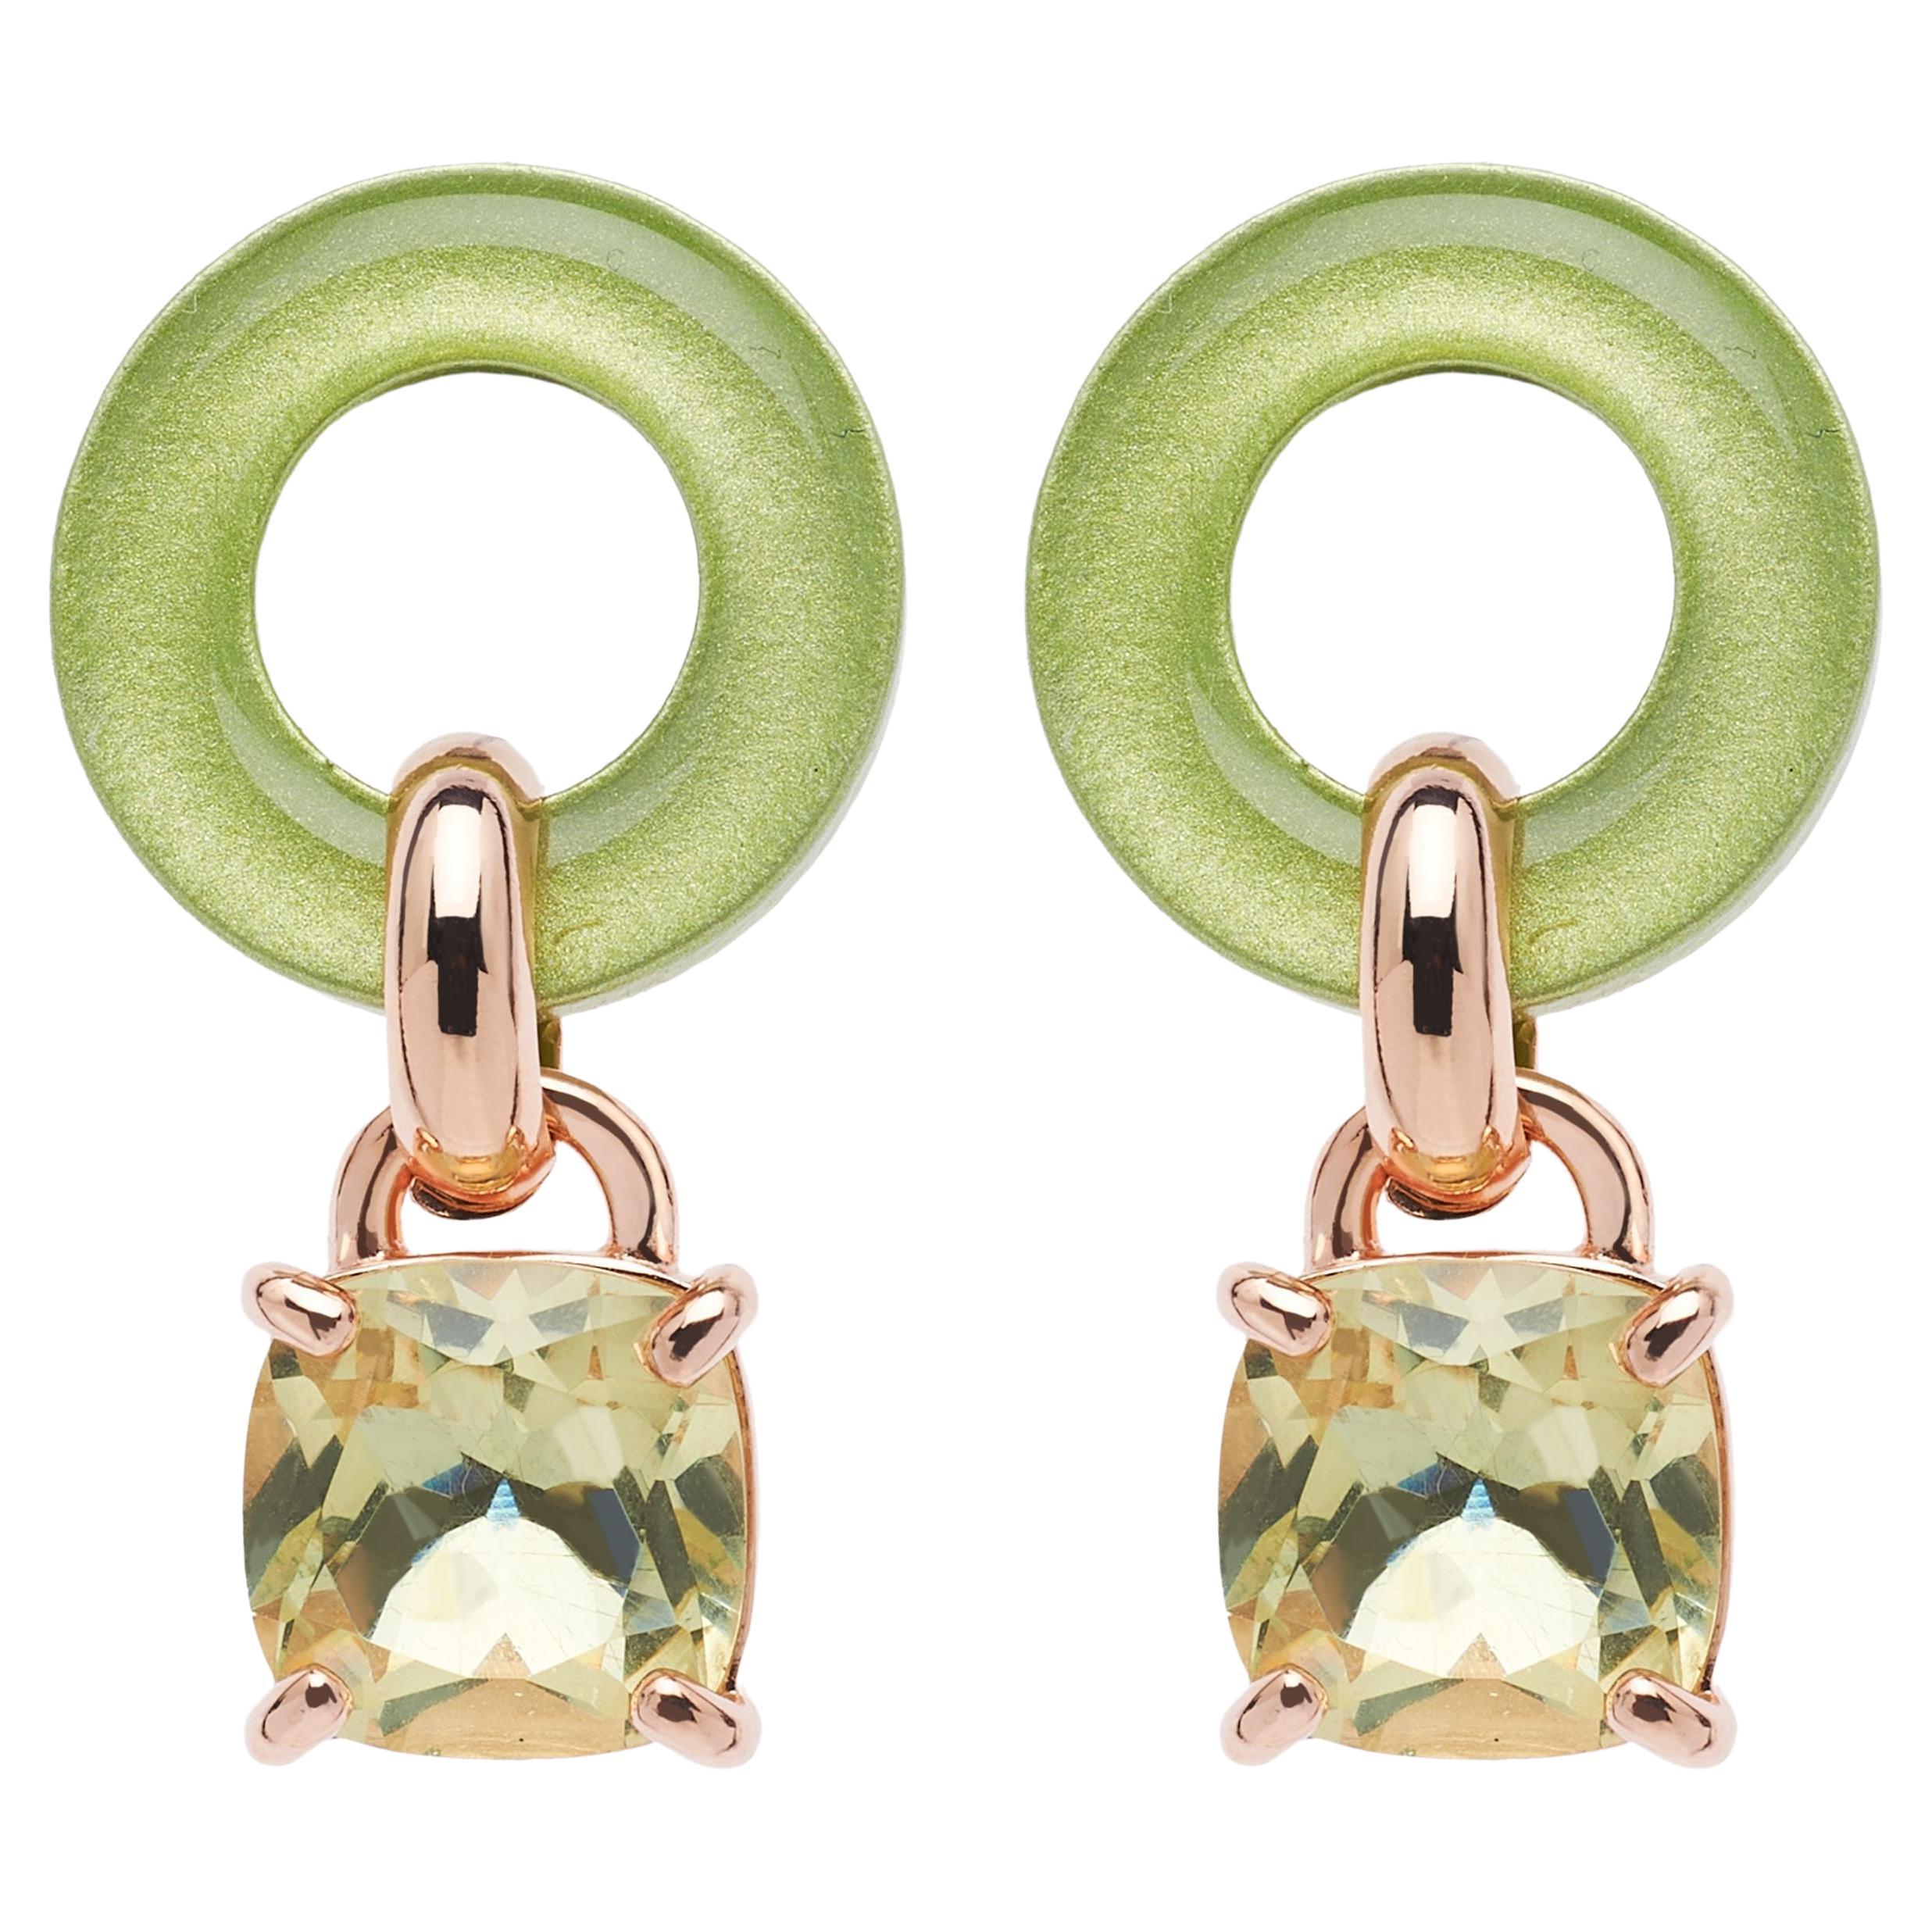 Rossoprezioso Stud Earrings in Lacquered and Enameled Wood + Quartz Cushion Cut